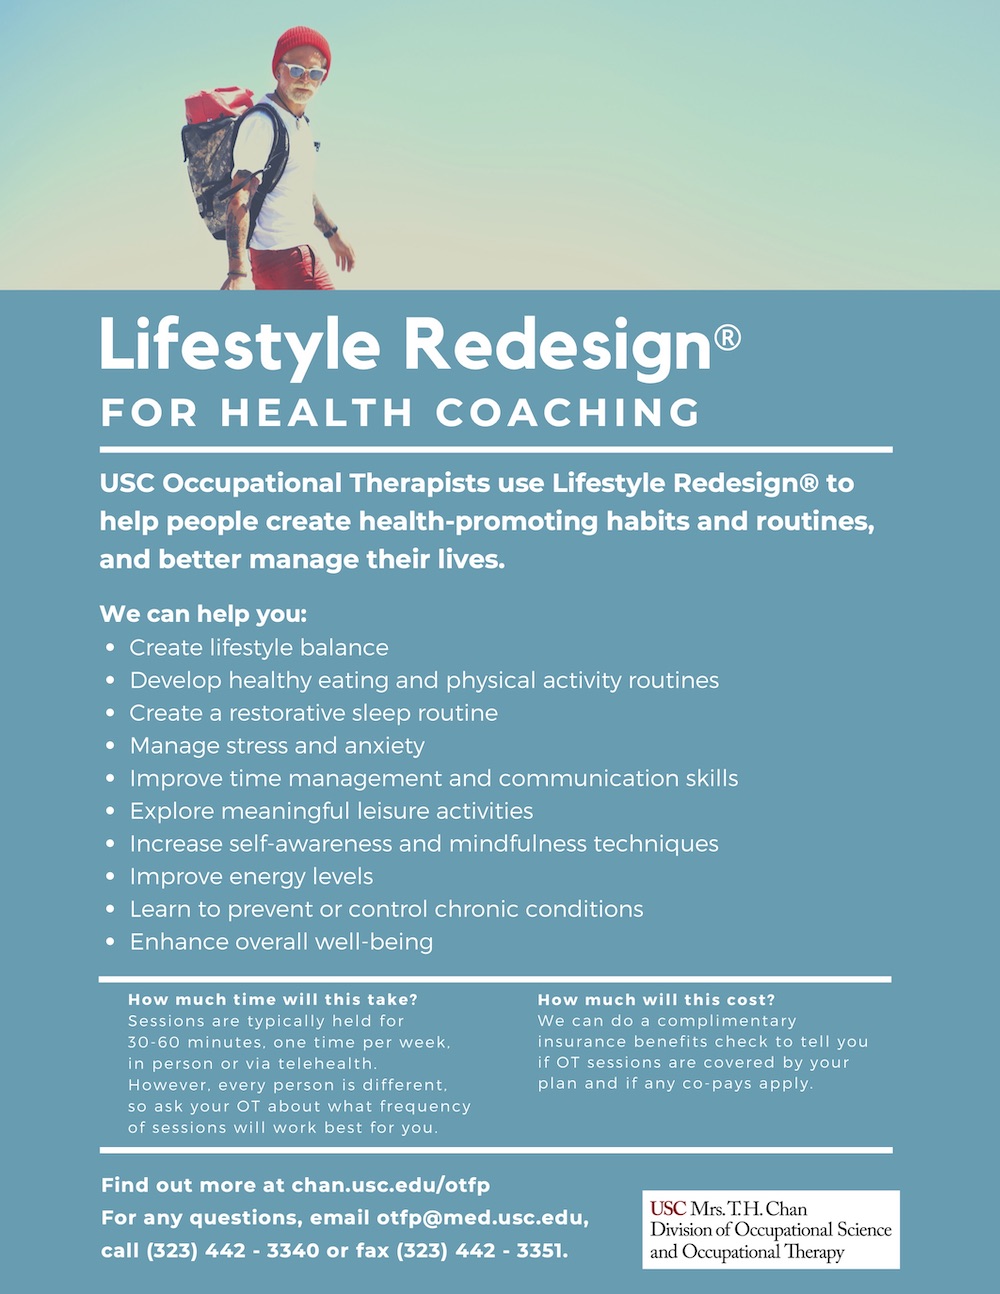 Lifestyle Redesign for Health Coaching